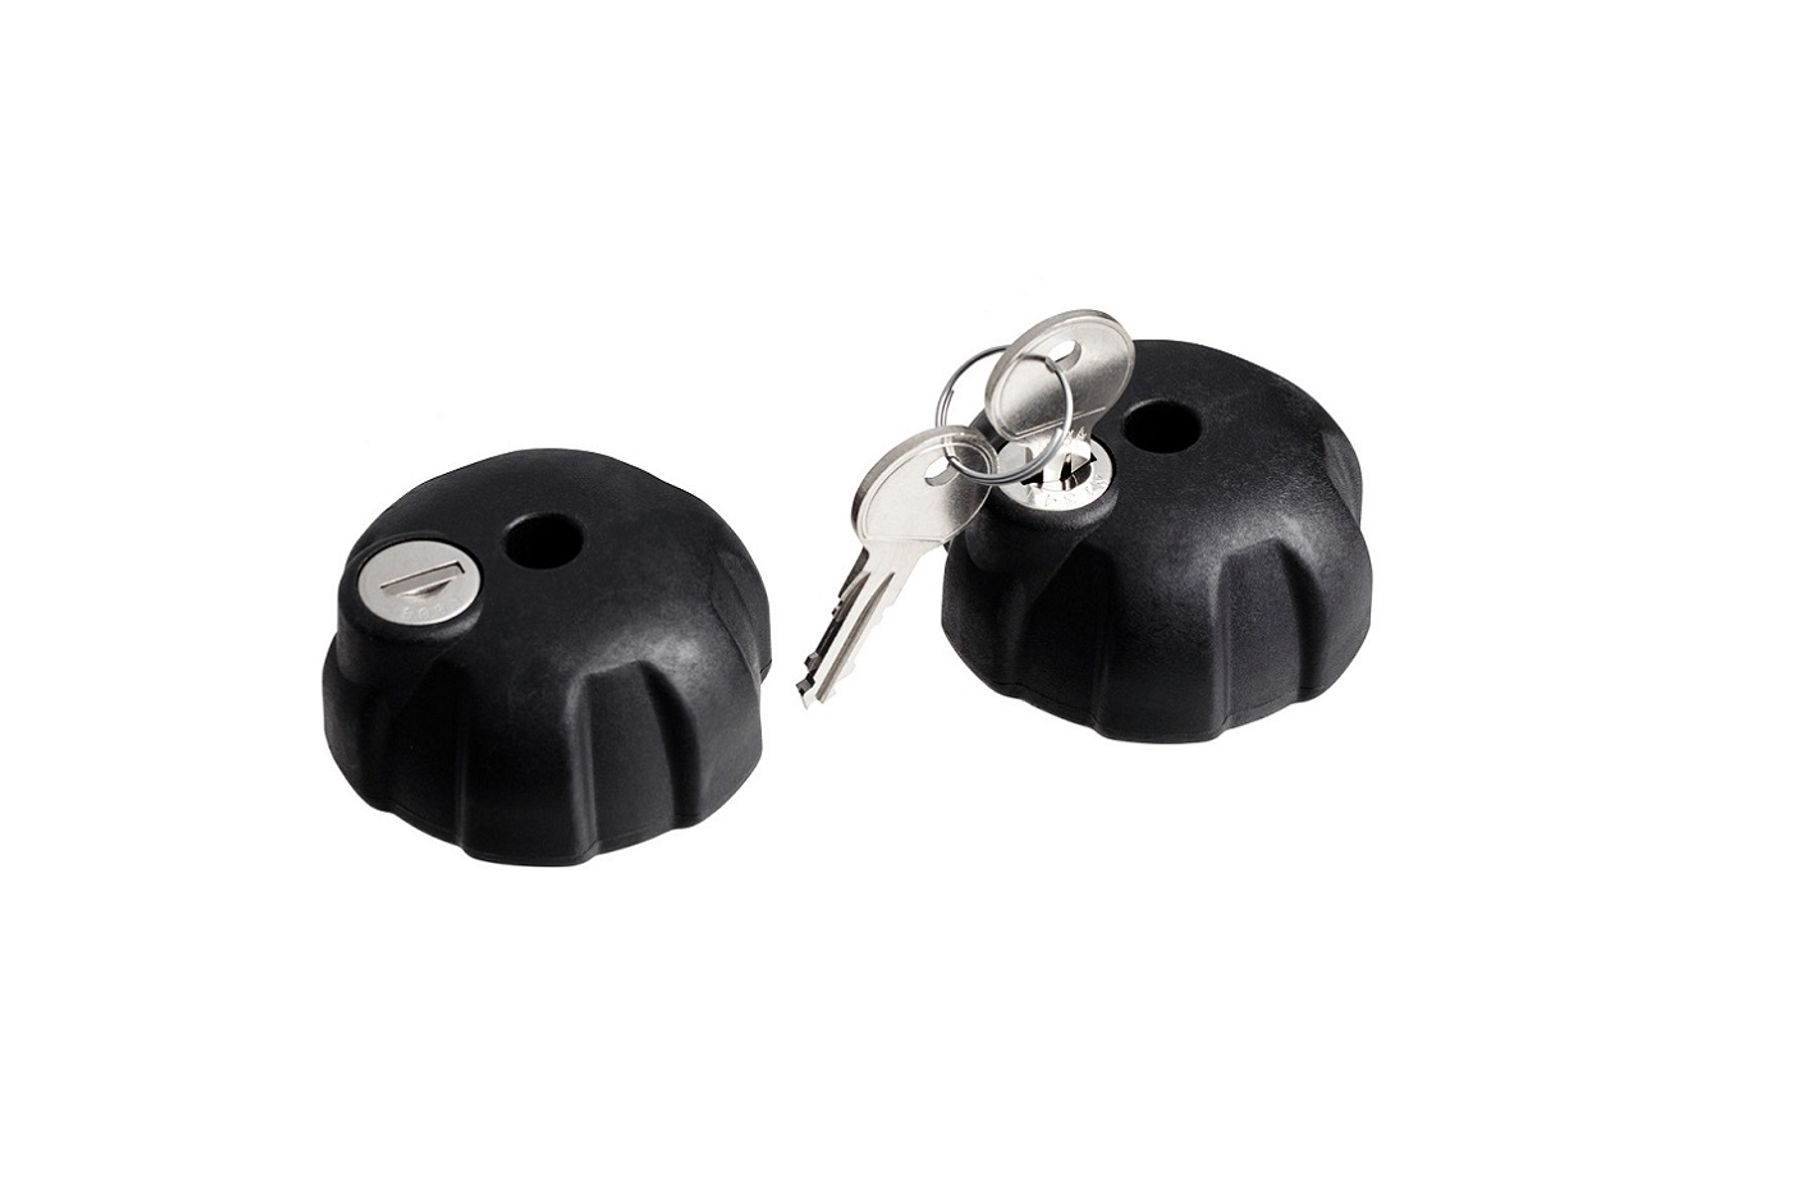 2 knobs with lock for bike holder to secure your bikes